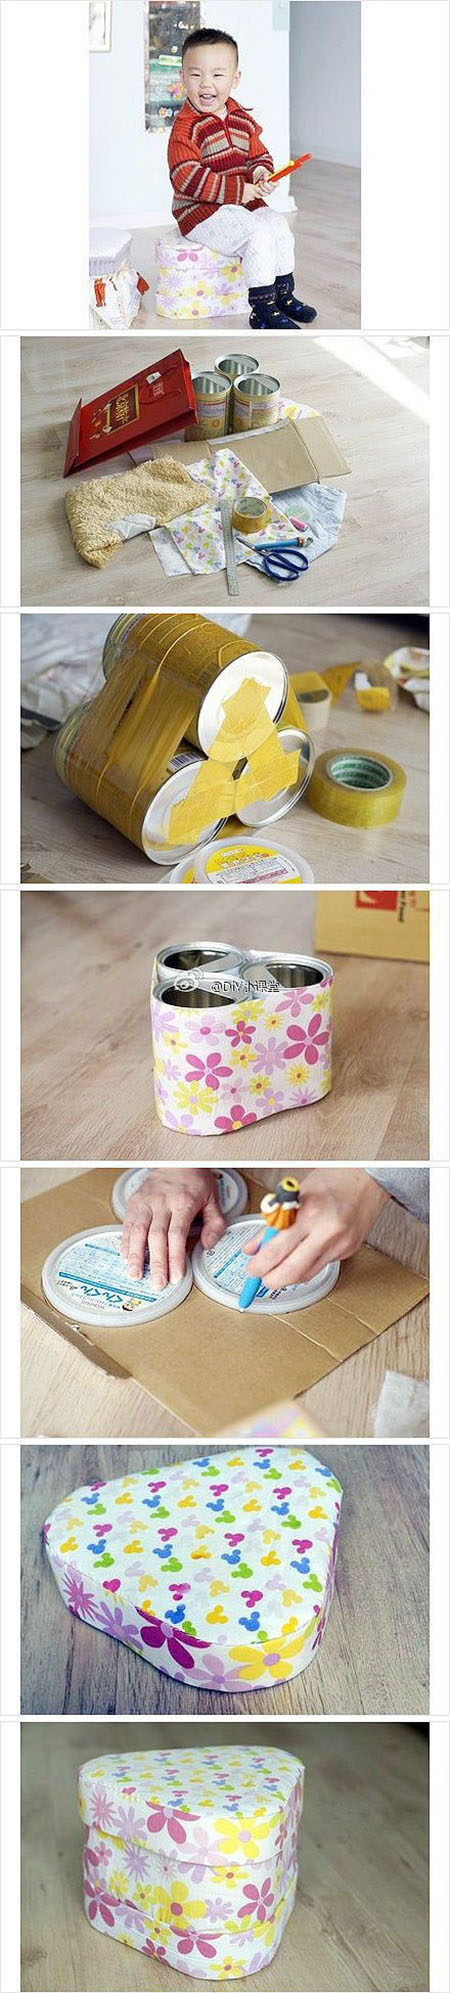 13  Cute recycling idea for tin cans.59f5bbd